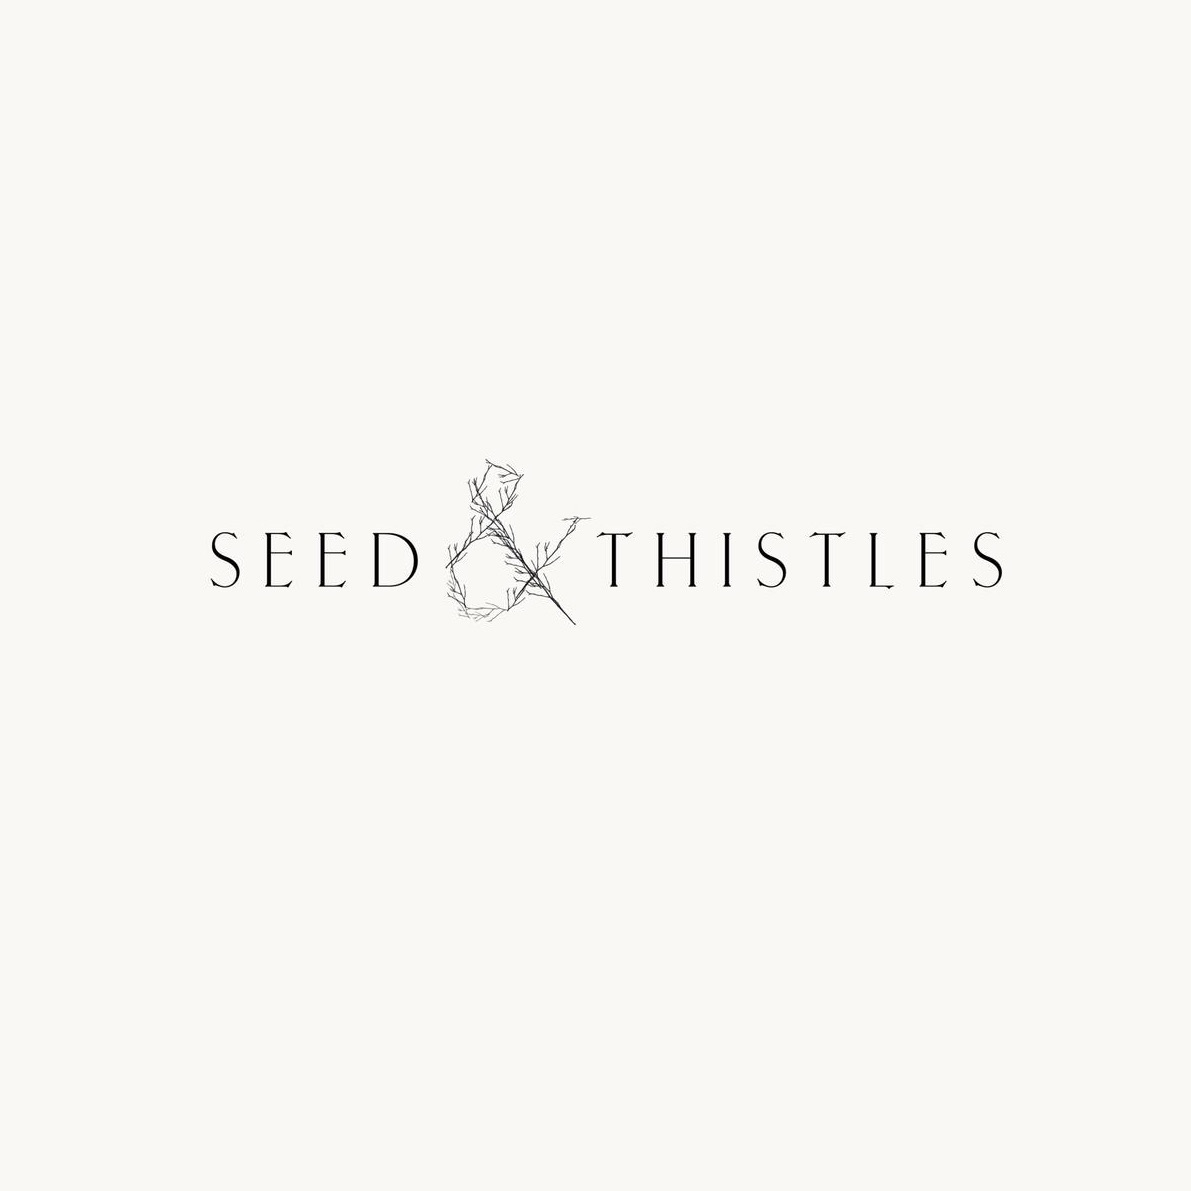 Seed and Thistles â€“Â dried botanical designs